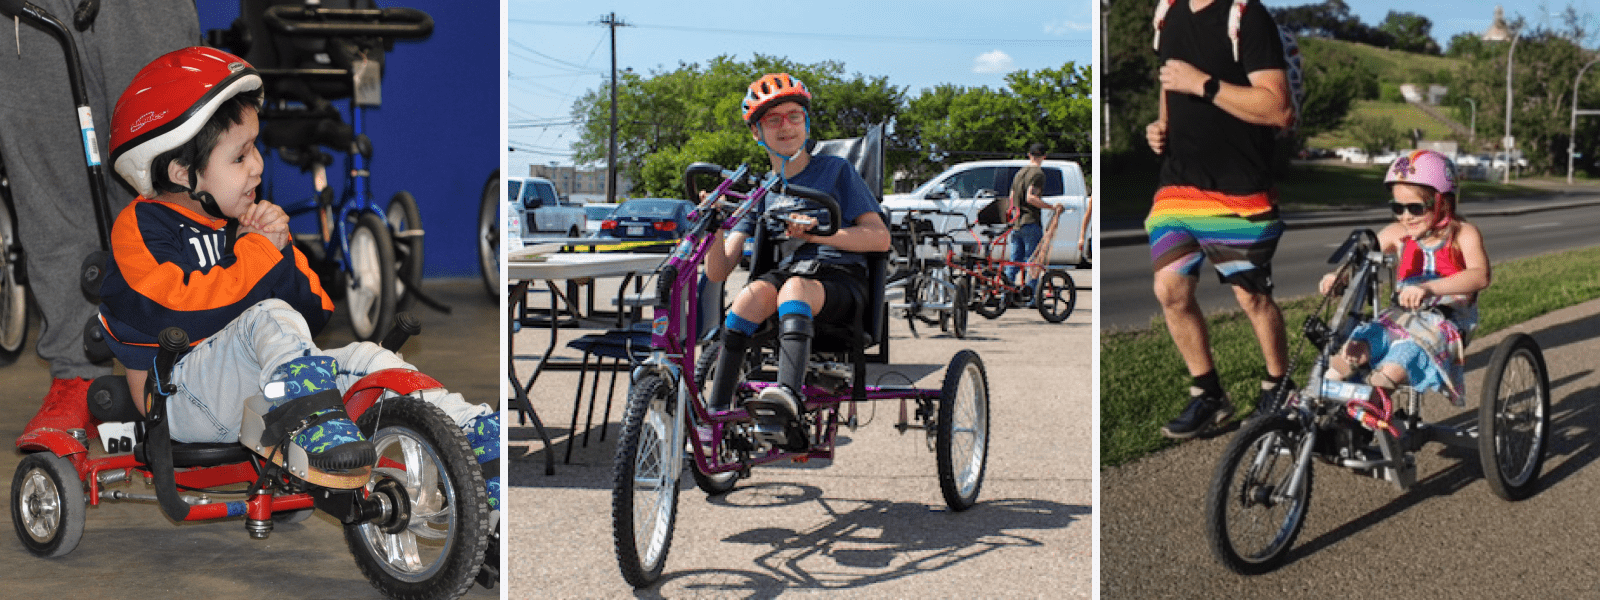 Young boy riding his modified bike in Goodwill of Alberta’s warehouse; A male youth with a physical disability posing for a photo on his modified bike; Girl in sunglasses riding a three-wheeled bike alongside her father.